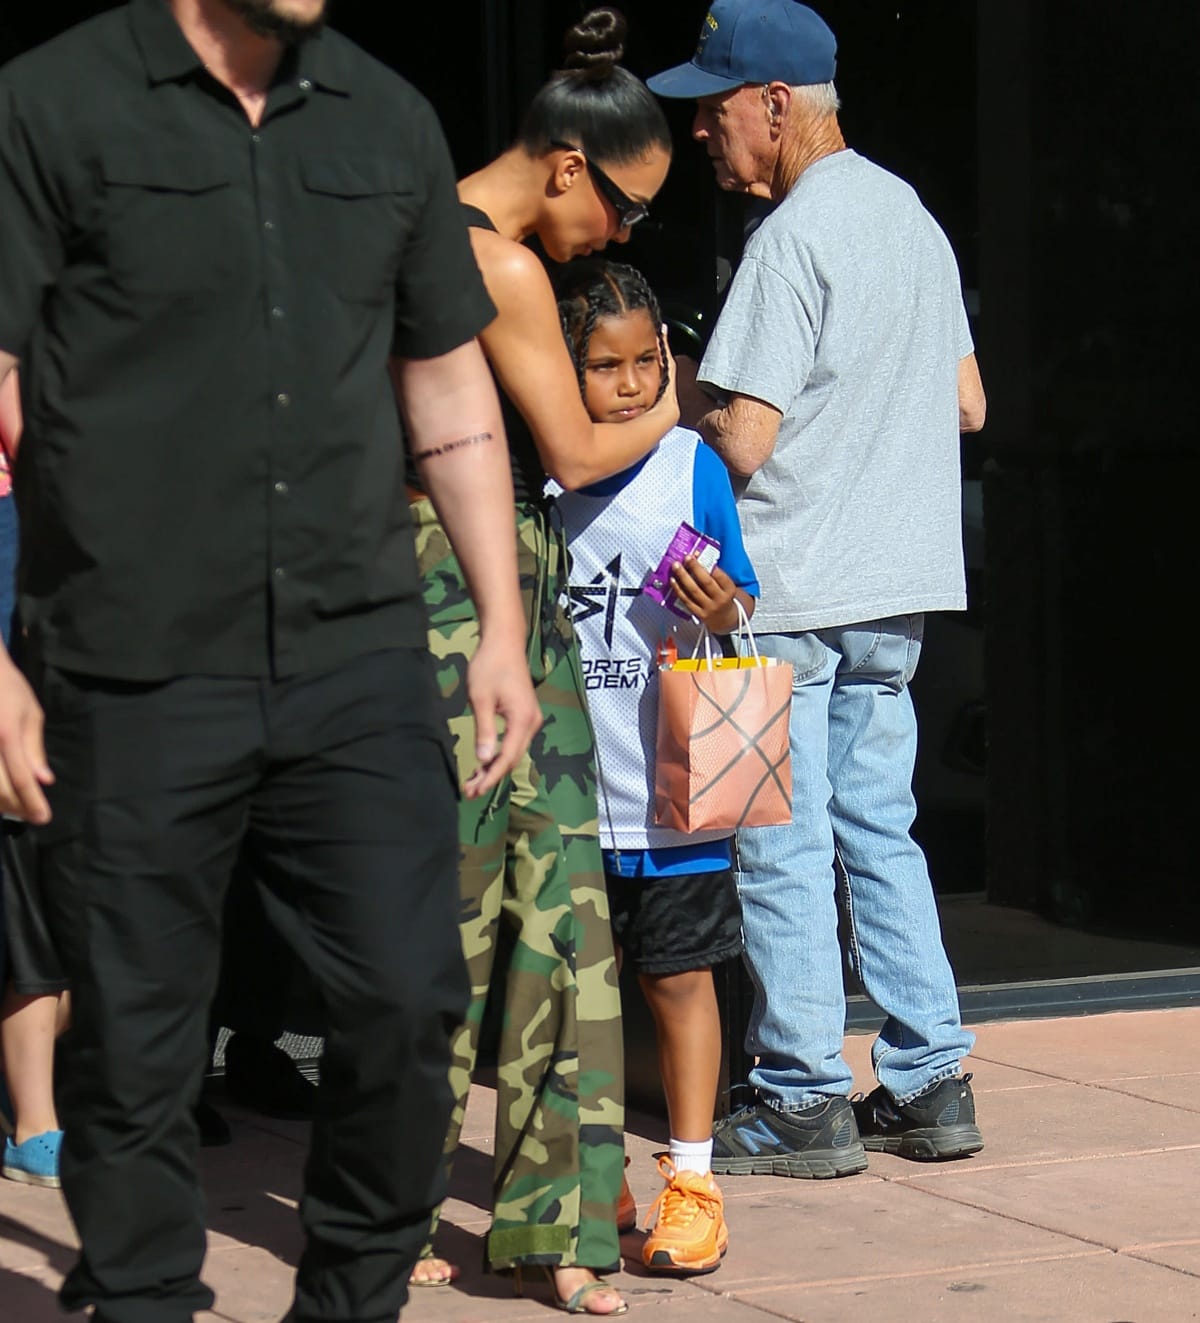 Kim Kardashian and son Saint West making an affectionate display while out and about in Los Angeles